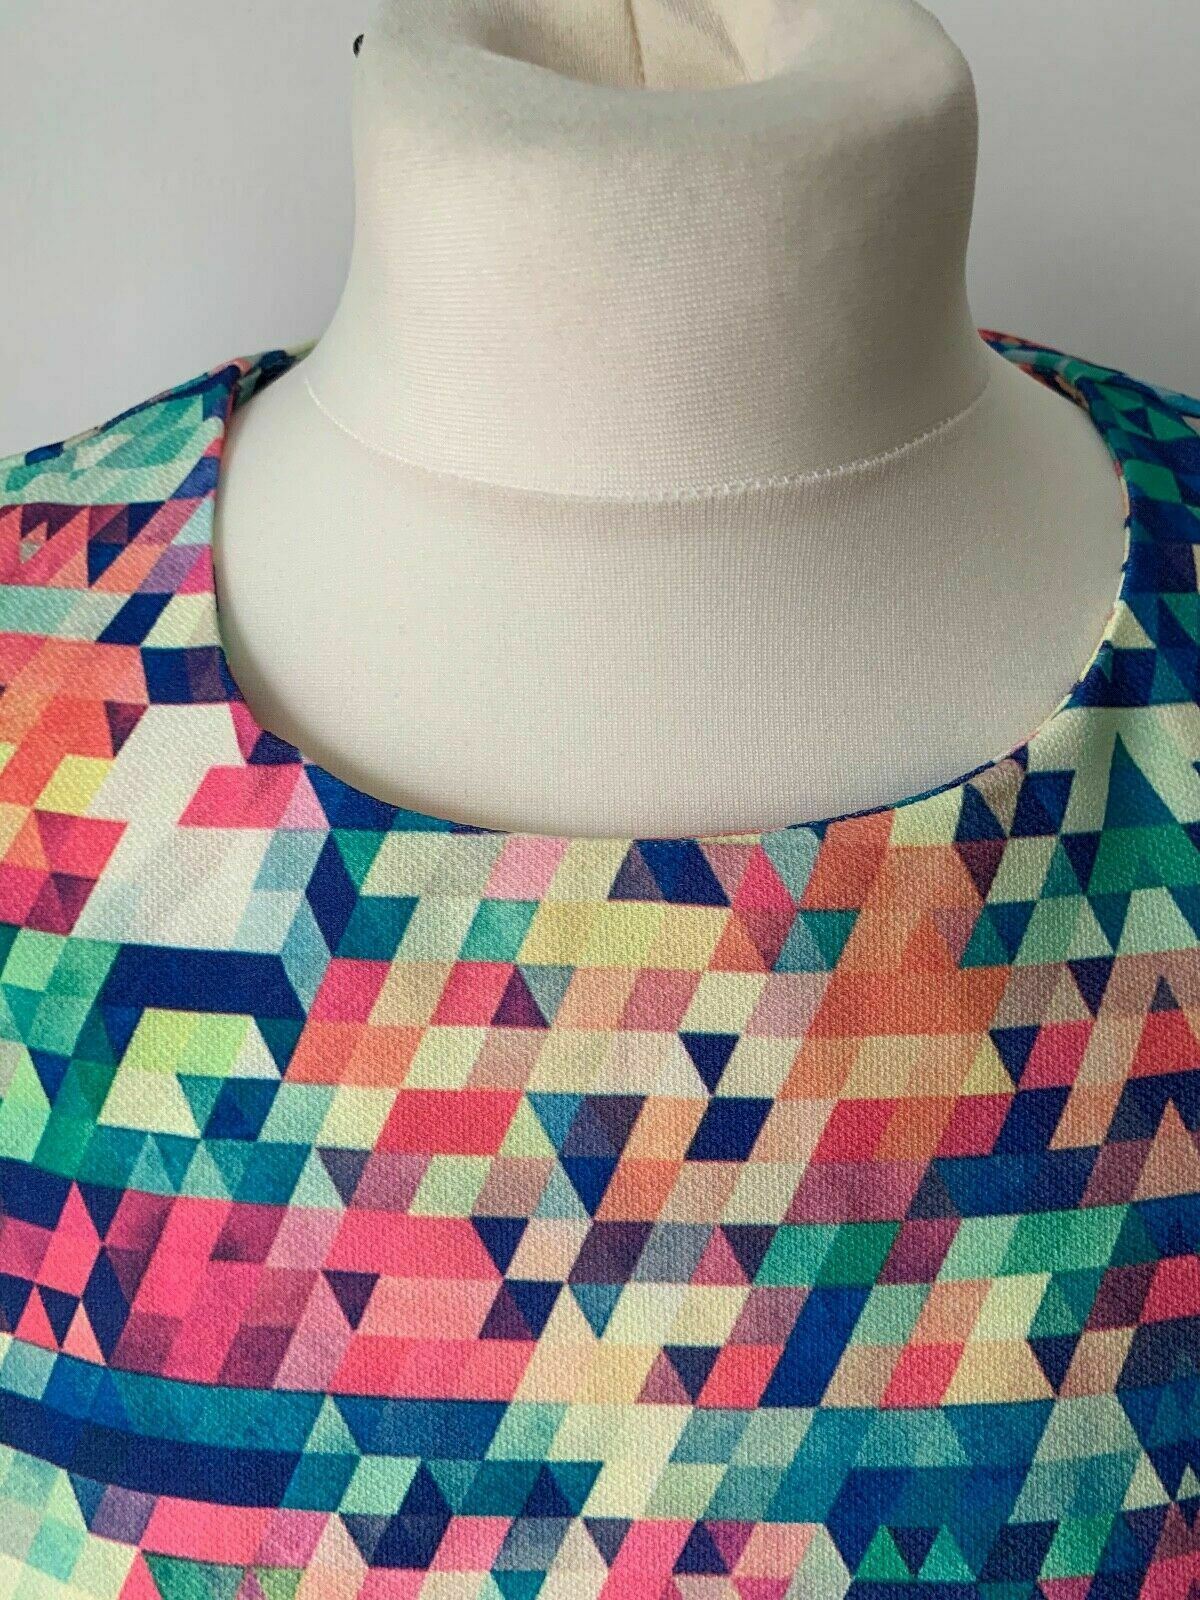 New Look Cameo Rose Shift Dress Geometric Bright Colourful Size 8 & 12 available